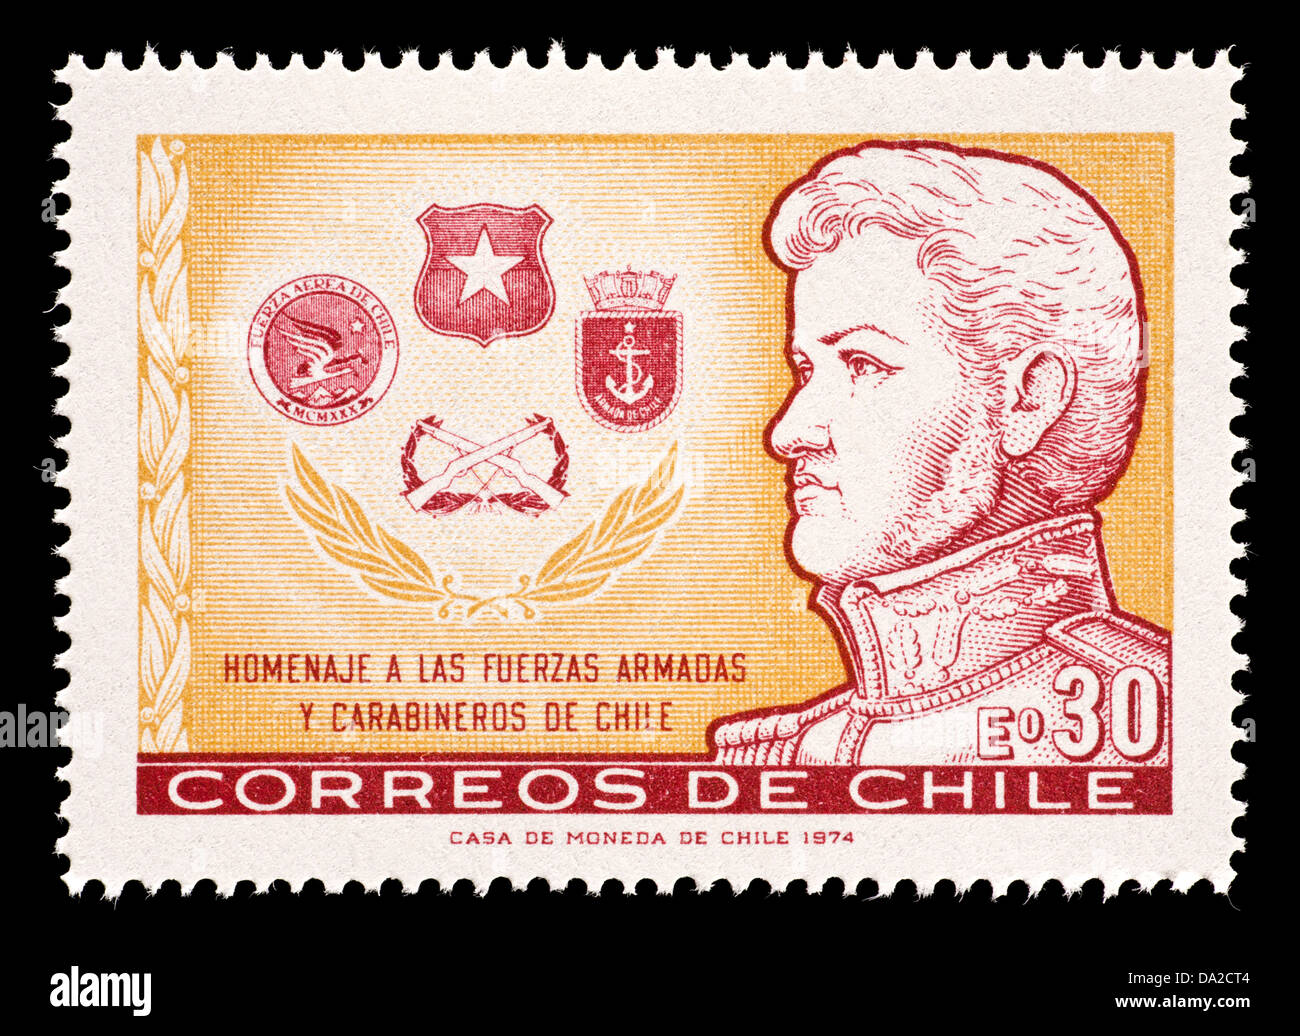 Postage stamp from Chile depicting Bernardo O'Higgins and the emblems of the four armed services. Stock Photo